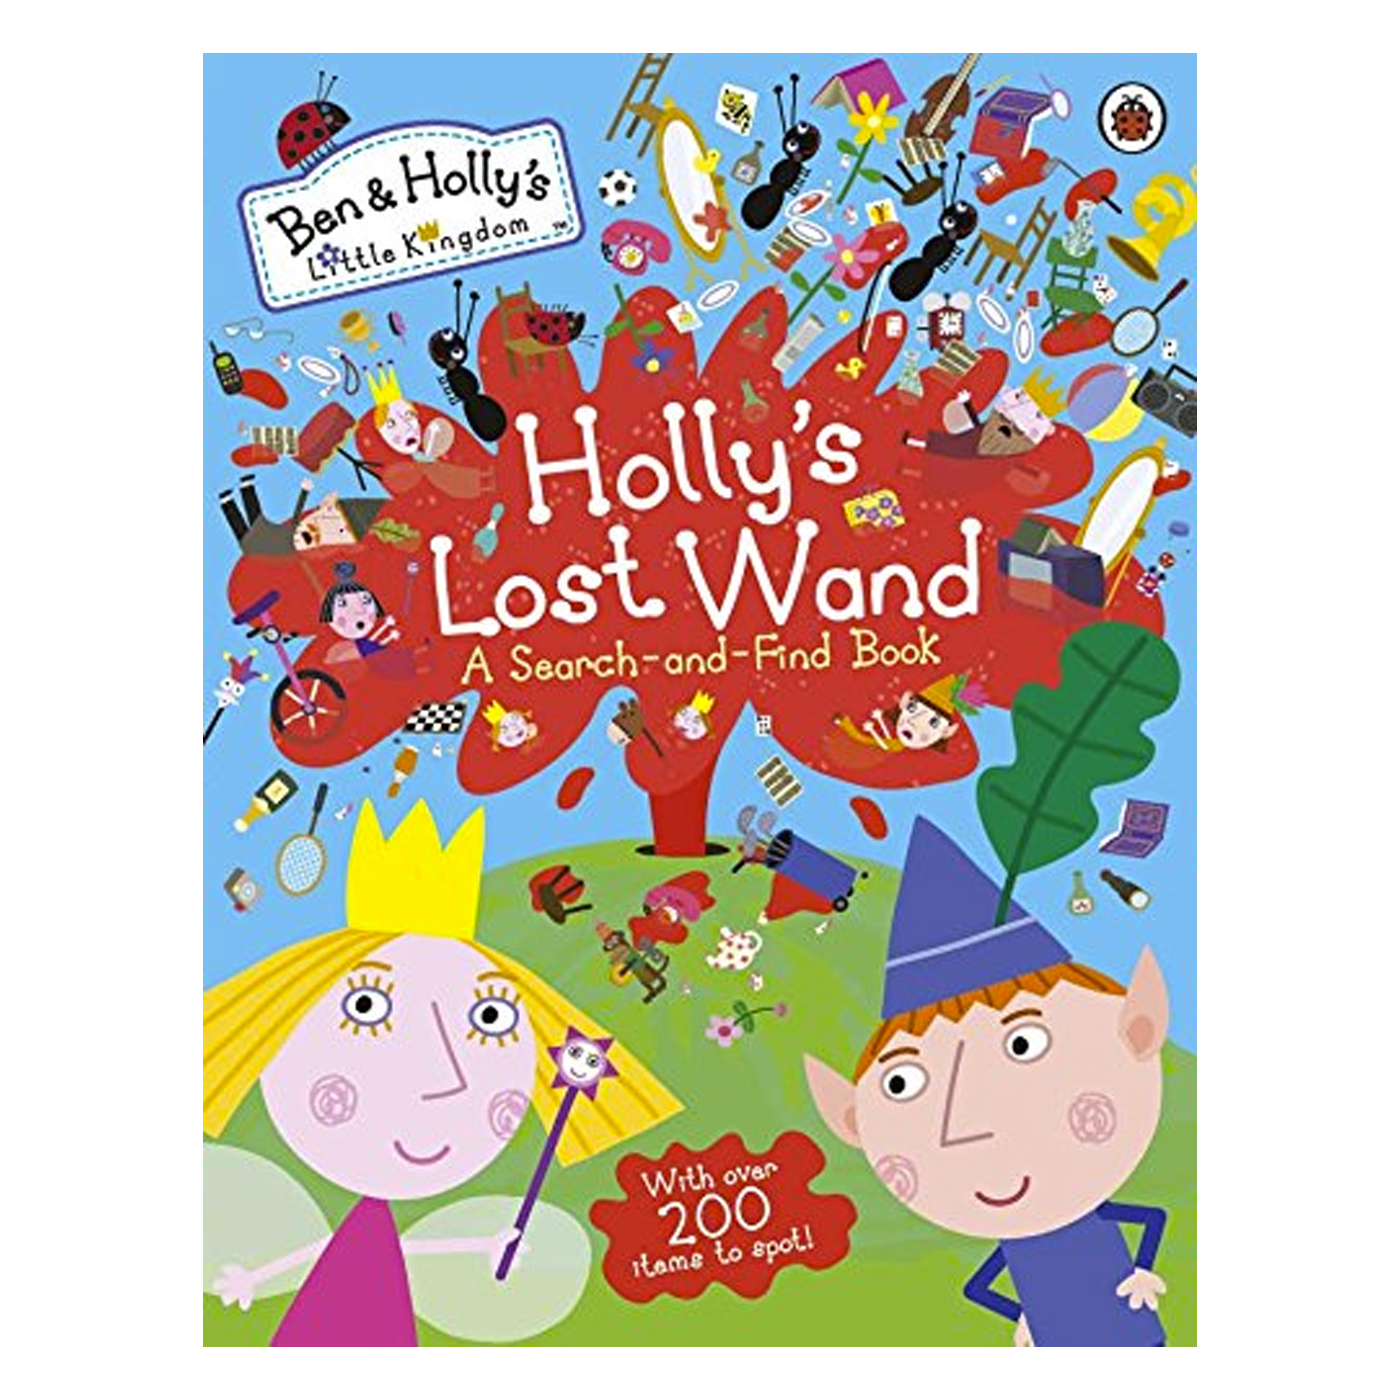 LADYBIRD Ben And Hollys Little Kingdom: Hollys Lost Wand - A Search-and-Find Book